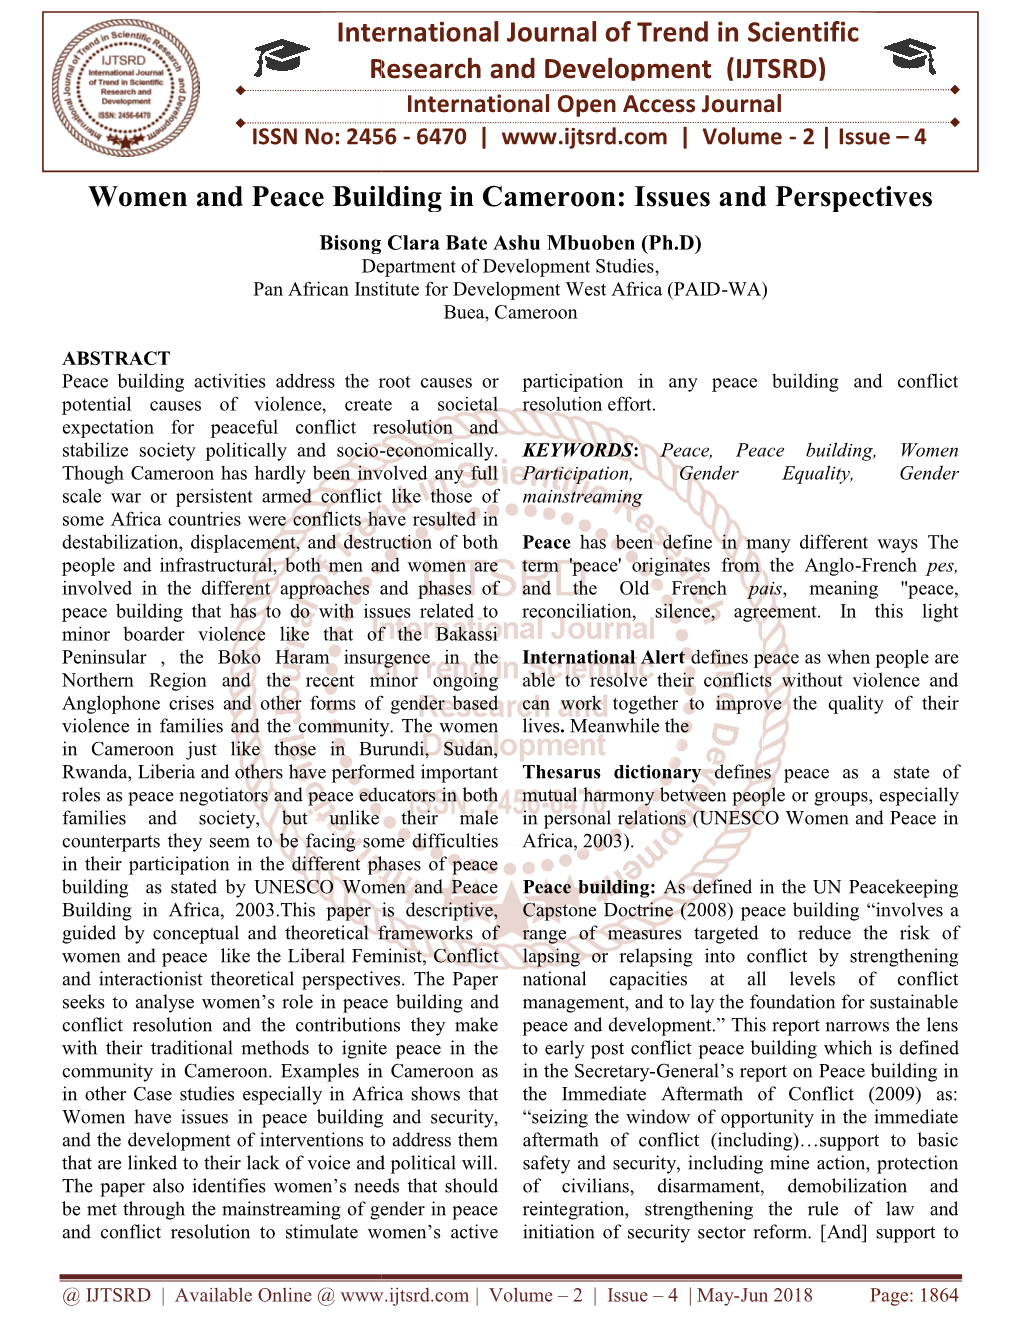 International Research Women and Peace Building in Cam International Journal of Trend in Scientific Research and Development